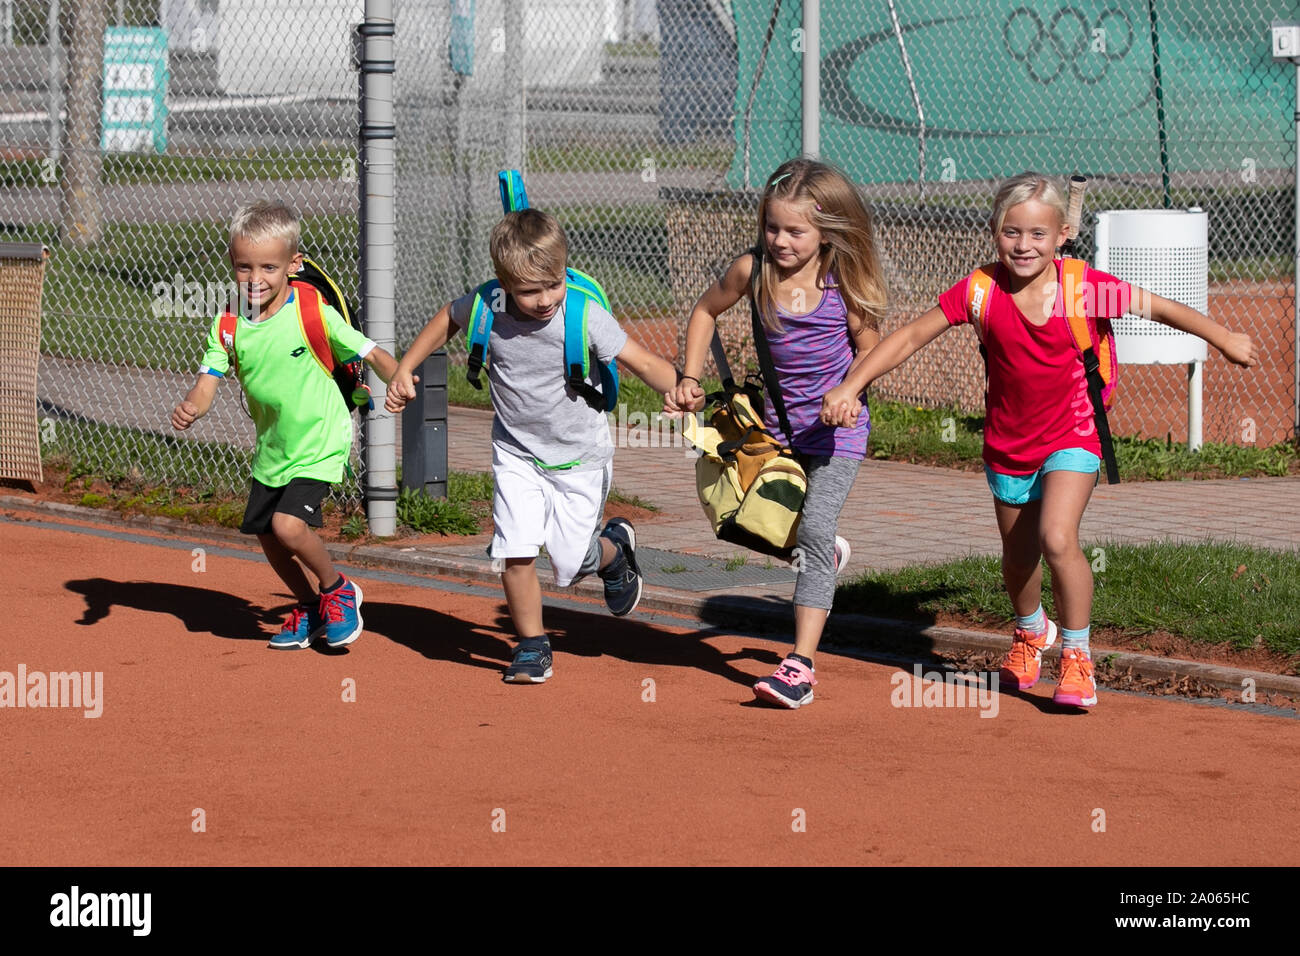 Children with bags and rackets running onto tennis court Stock Photo